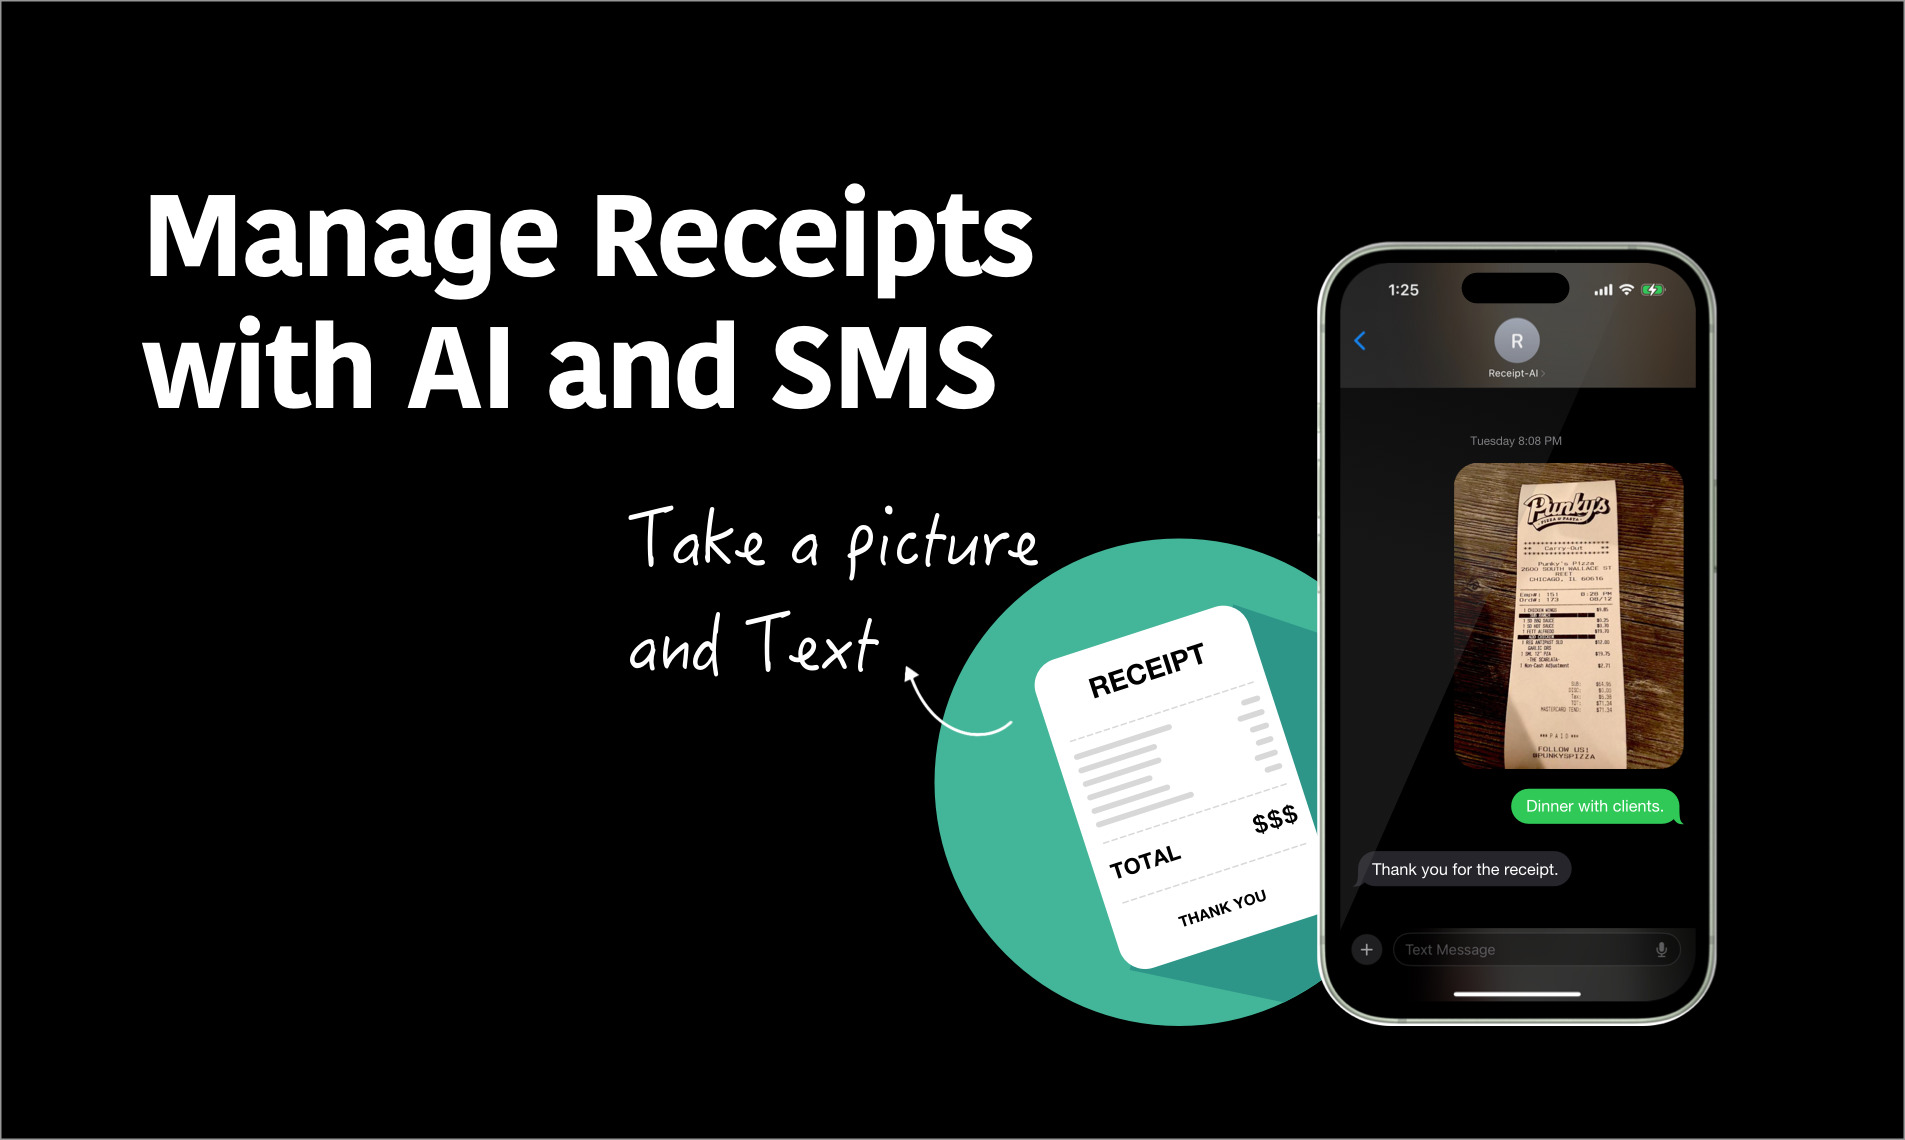 The image is from "Receipt-AI", which allows users to manage receipts using AI and SMS. The background is black, creating a sharp contrast for the white and green elements. On the left side, large, bold white text reads "Manage Receipts with AI and SMS." Below this, in a handwritten-style white font, it says "Take a picture and Text," with an arrow pointing to an illustration of a receipt. The receipt illustration is simple, with a heading labeled "RECEIPT," and line items and prices listed below, such as "Pizza - $5.00," "Fettuccine alfredo - $20.00," and a total price at the bottom, all inside a green circular background. On the right side of the image, there is a smartphone displaying a text conversation. The screen shows a photo of a physical receipt from "Punky's" restaurant. The text conversation includes a message saying "Dinner with clients," followed by an automated response saying, "Thank you for the receipt." Overall, the image effectively communicates the concept of using Receipt-AI and SMS to simplify receipt management by capturing and processing receipts via text messages. The inclusion of "Receipt-AI" branding reinforces the service's identity.